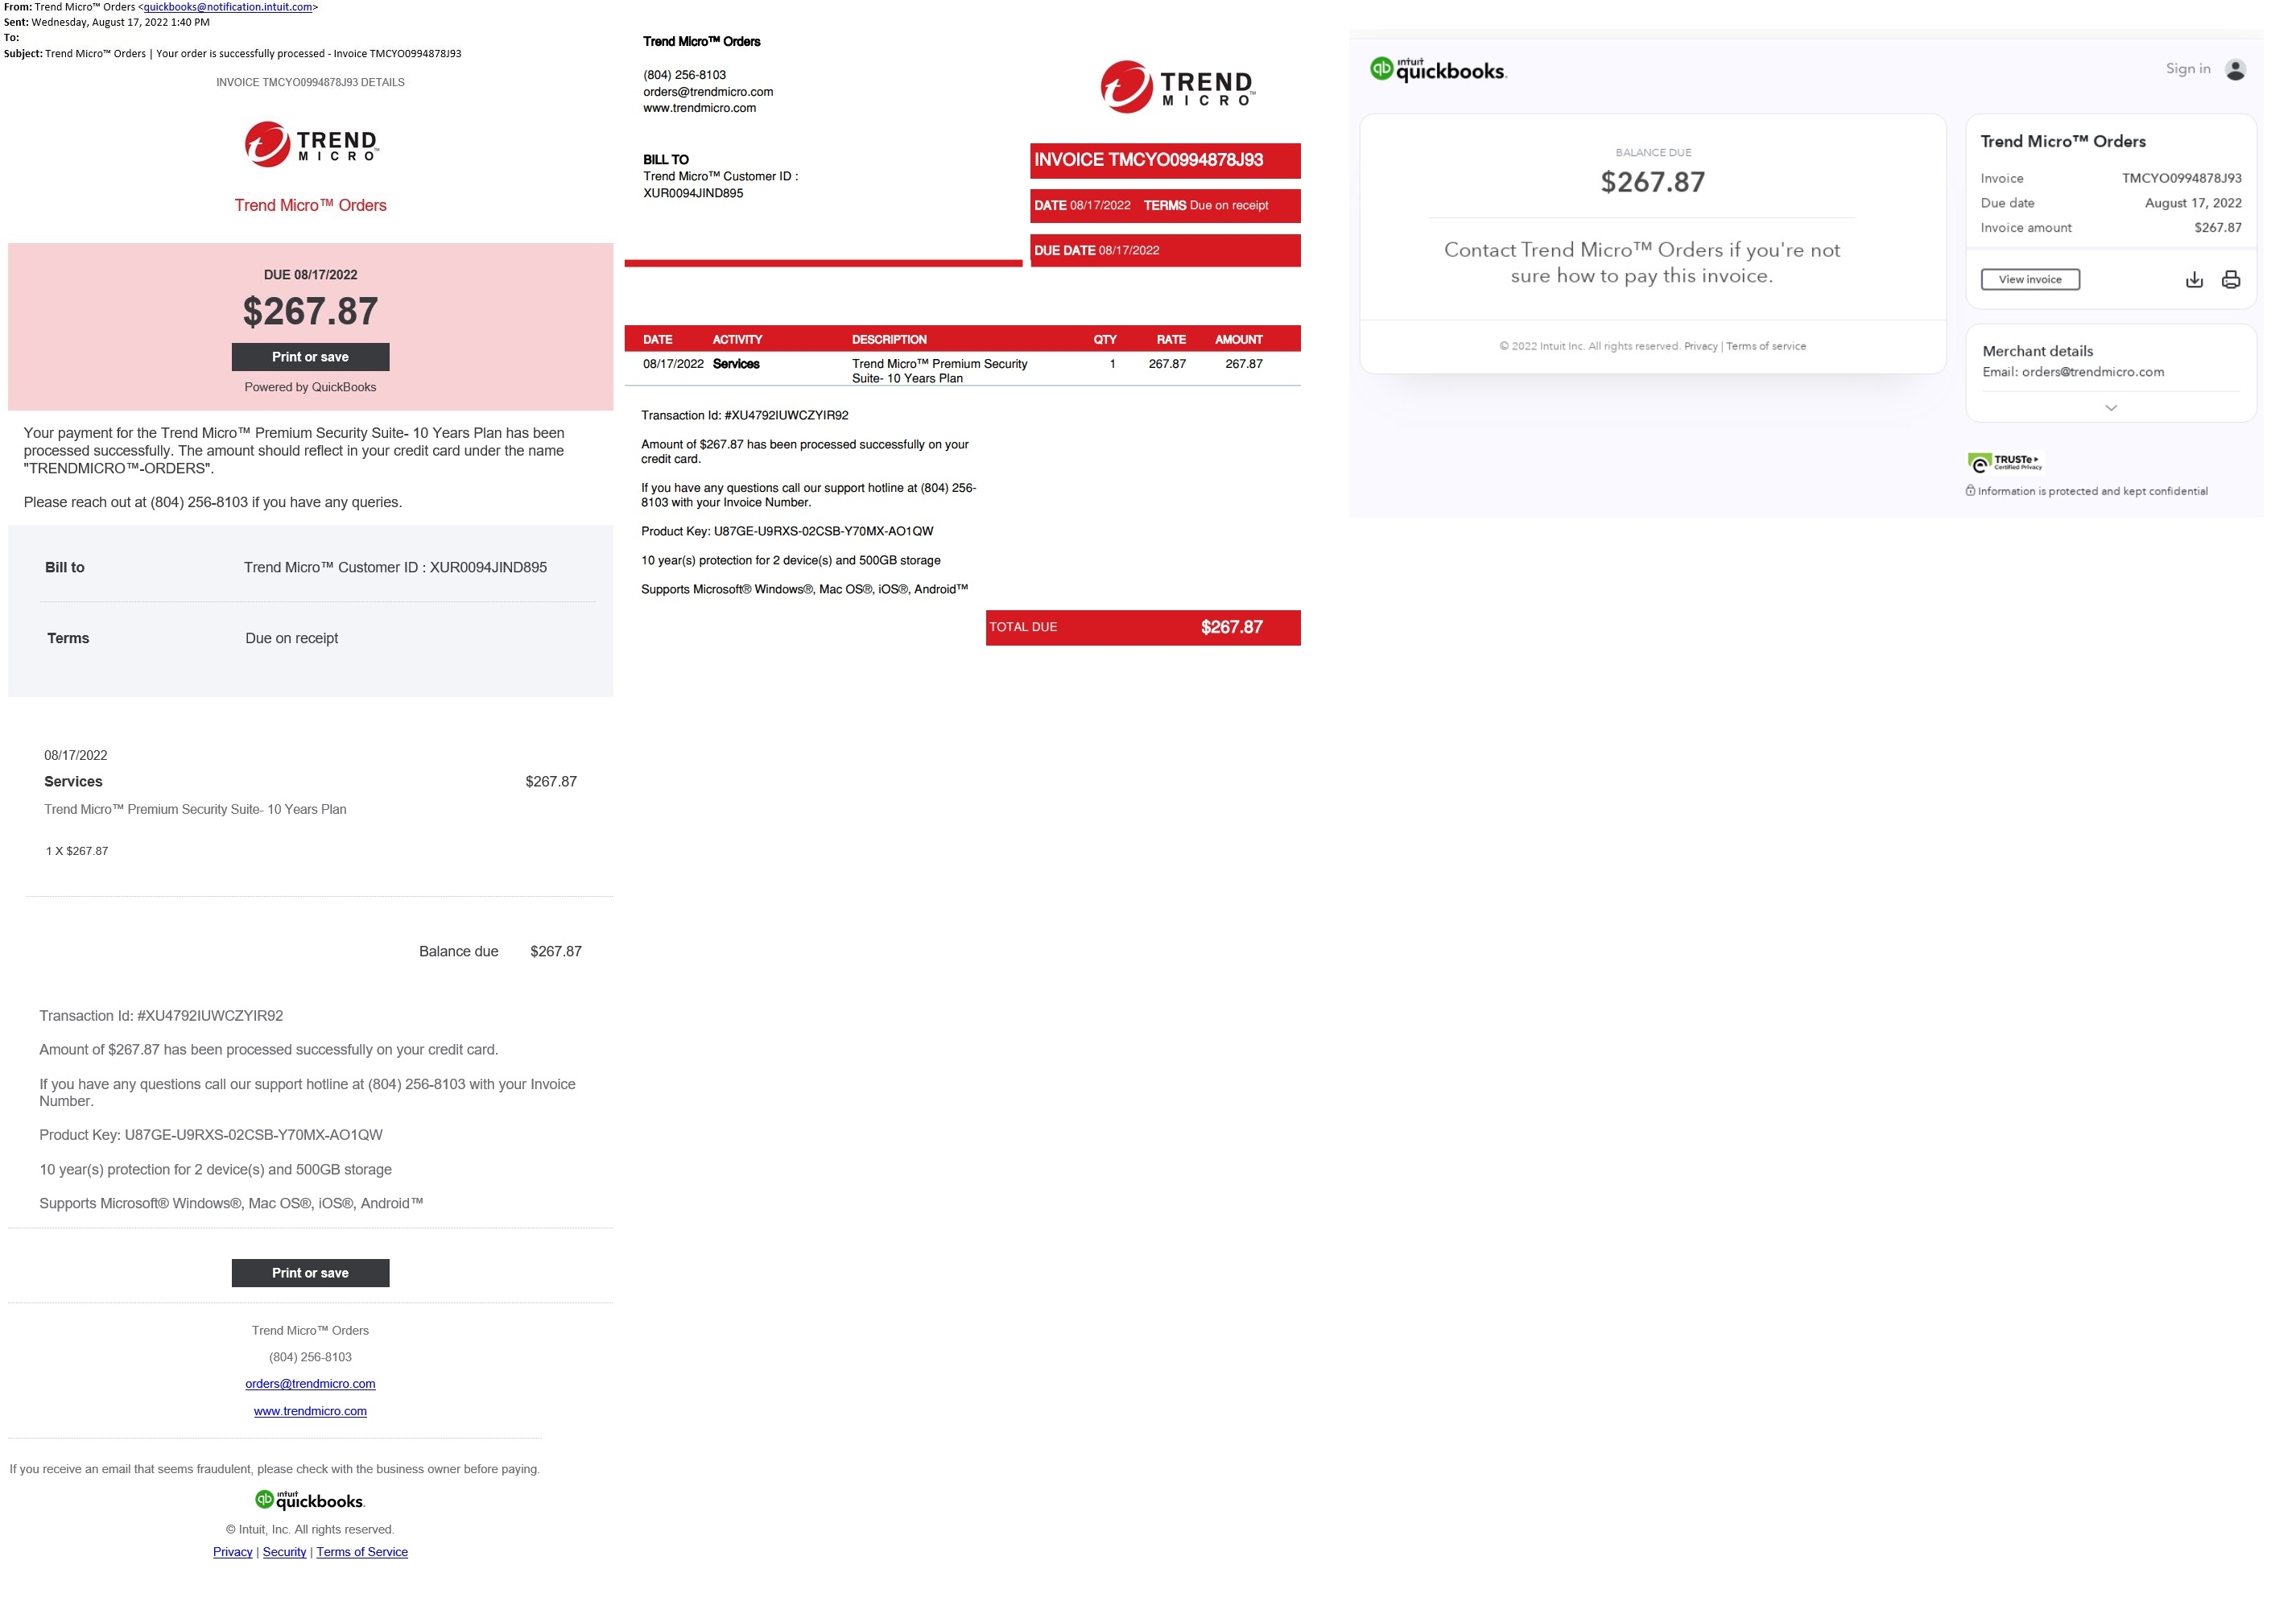 Trend Micro Fake Email Reported August 2022 Sample 1